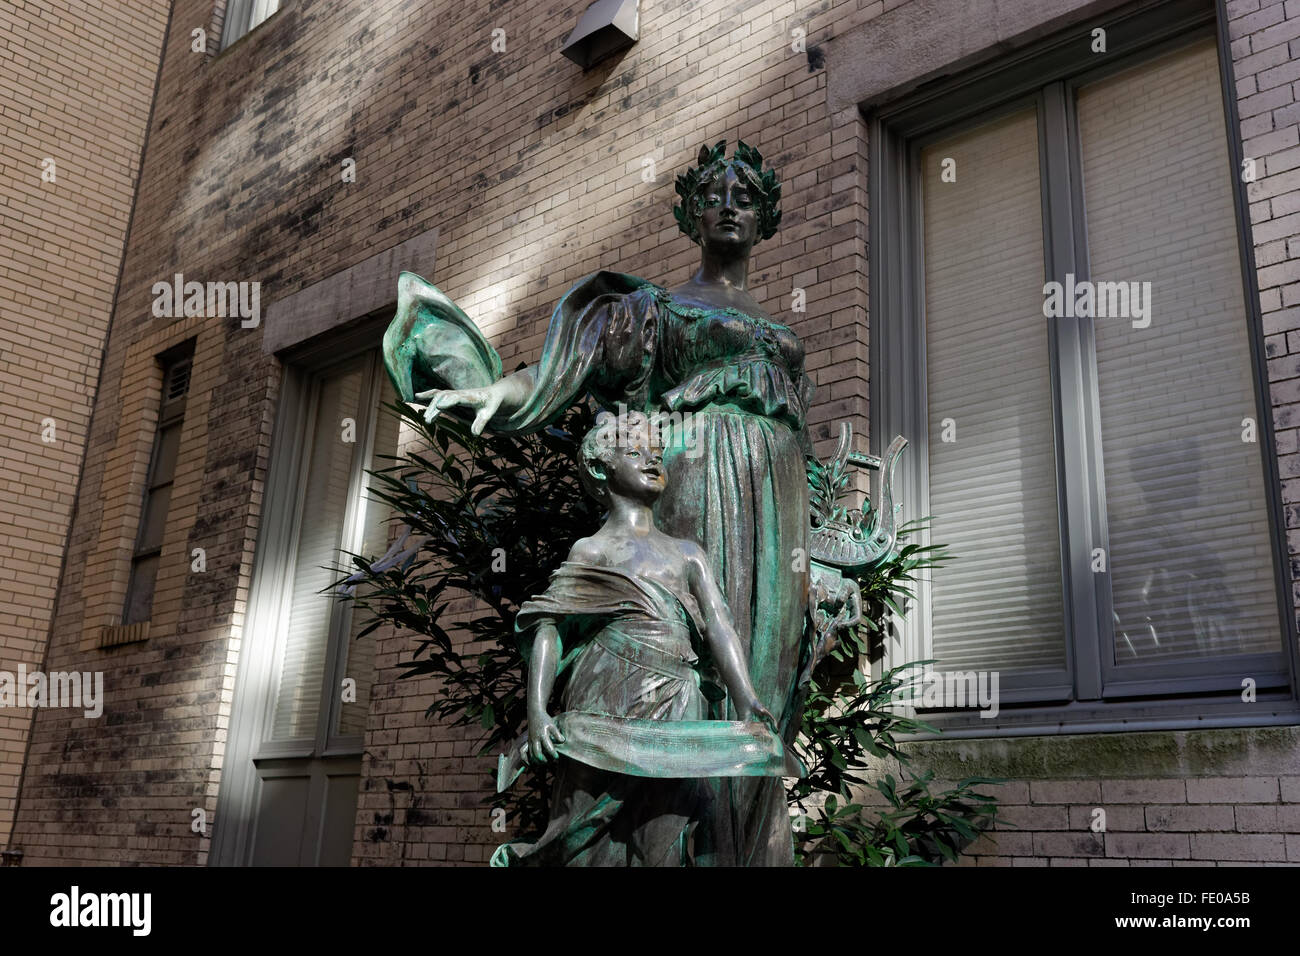 A statue of  Polyhymnia, the Greek goddess of poetry, by Giuseppe Moretti stands outside the Liederkranz of the City of New York Stock Photo